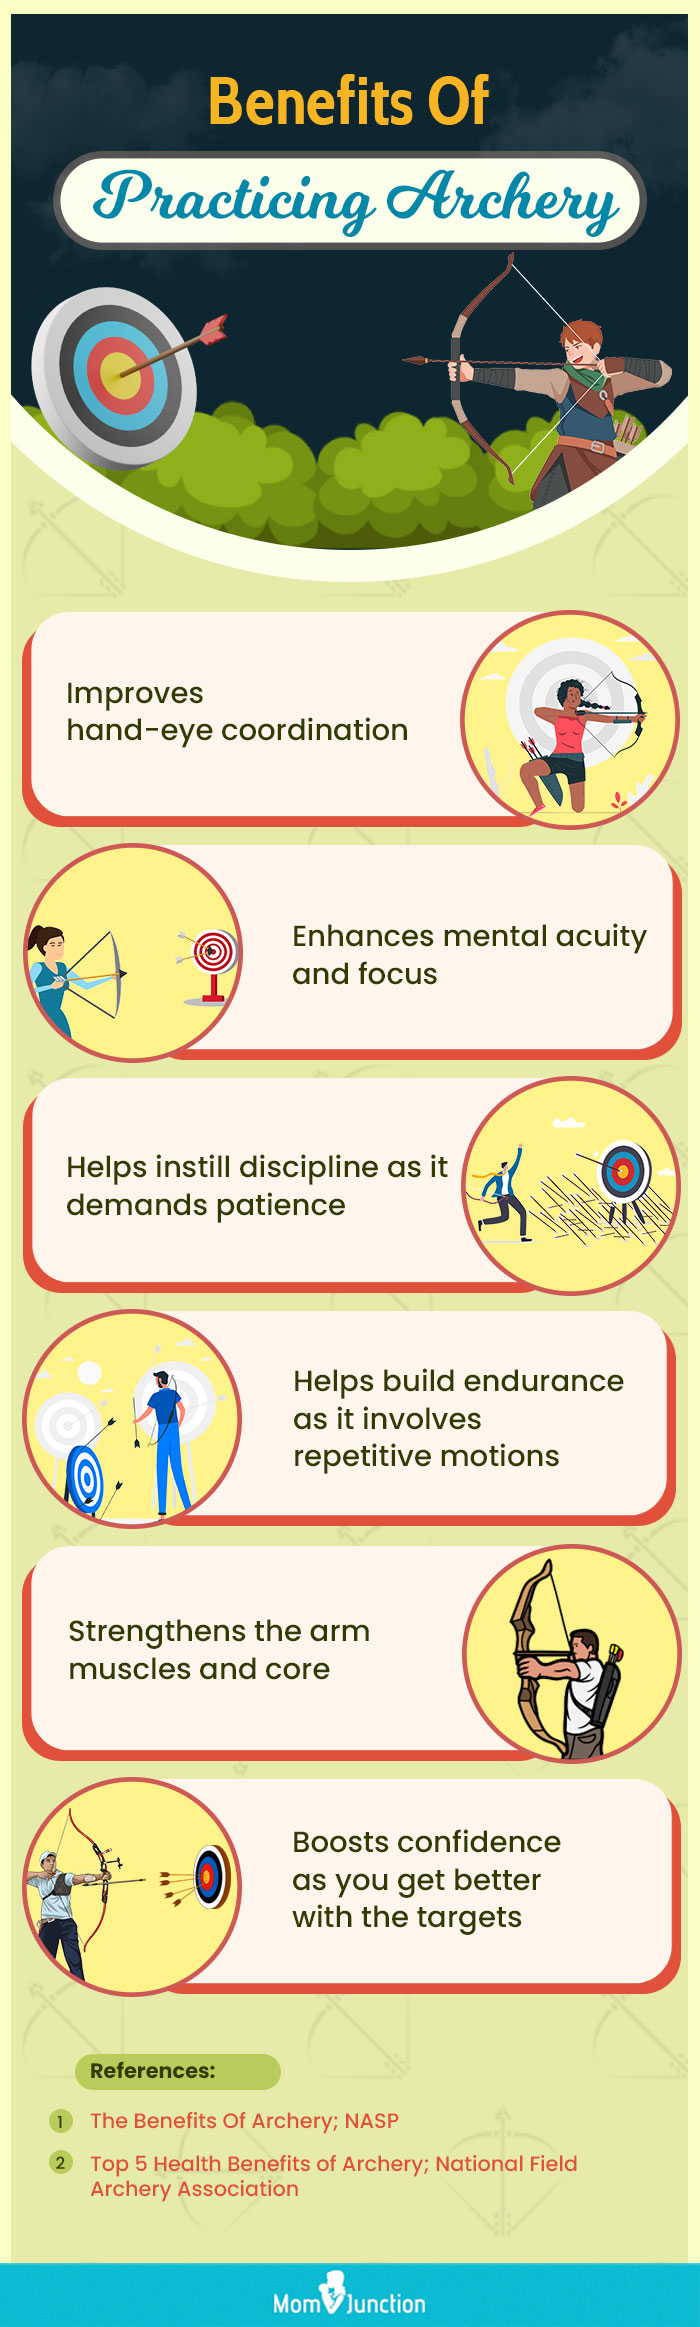 Benefits Of Practicing Archery (infographic)